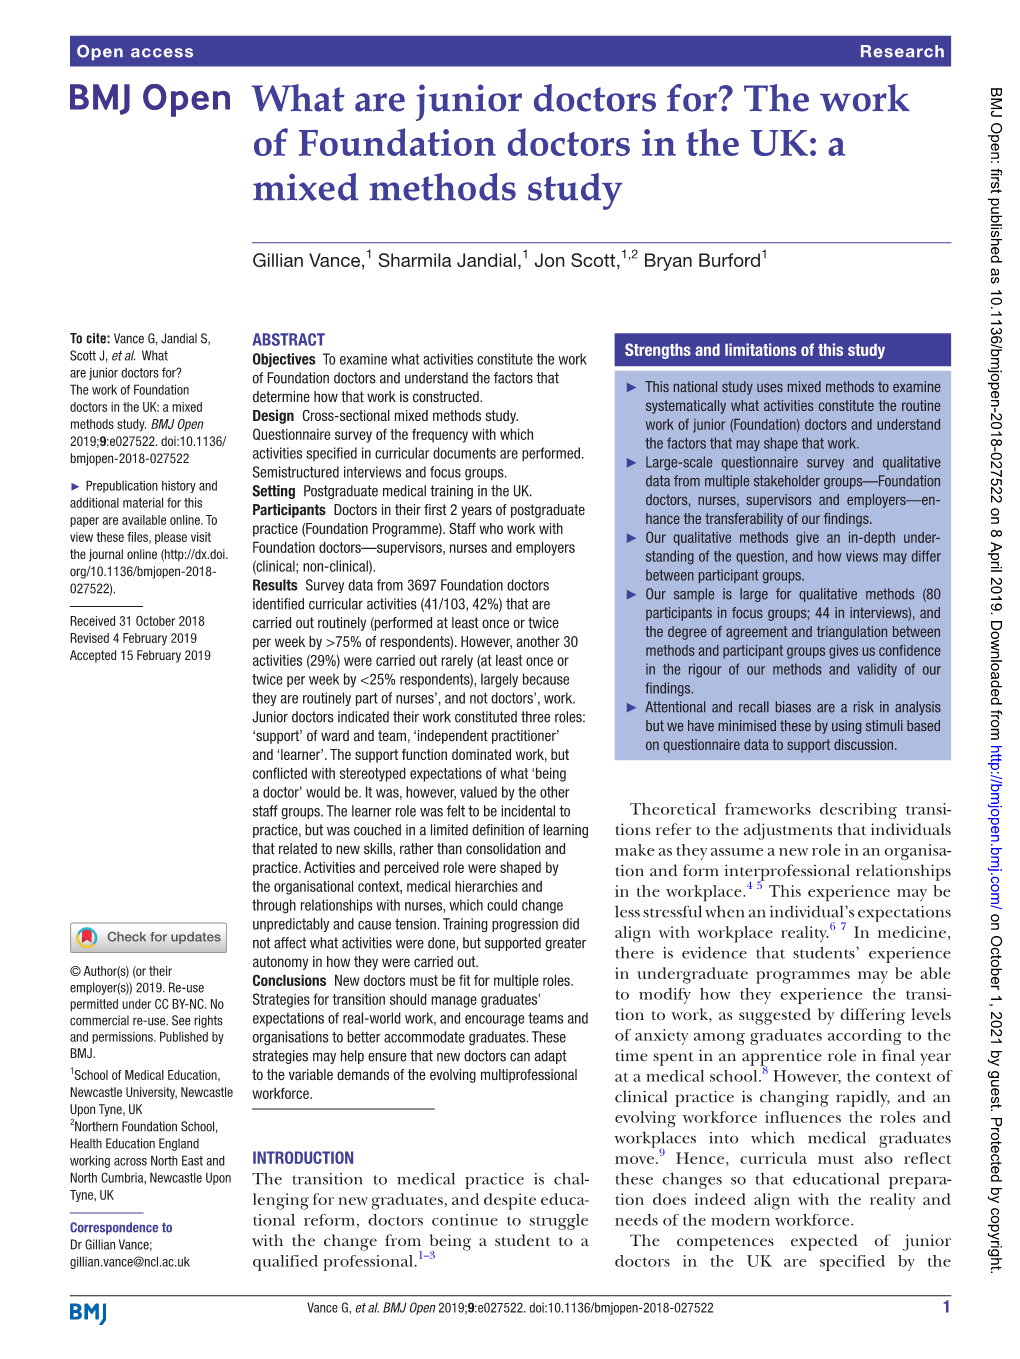 The Work of Foundation Doctors in the UK: a Mixed Methods Study